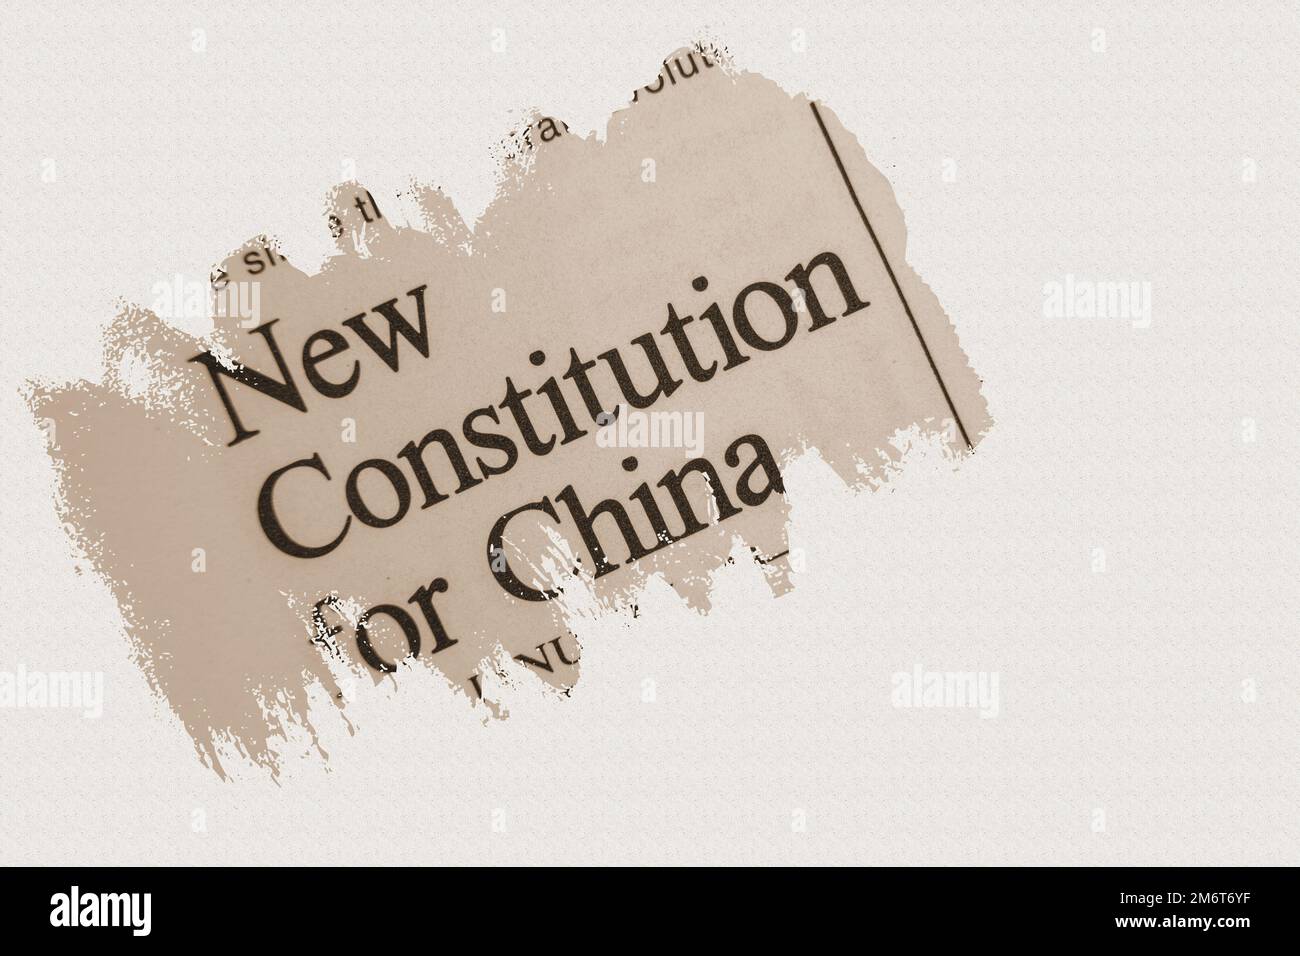 news story from 1975 newspaper headline article title - New constitution for China - sepia Stock Photo